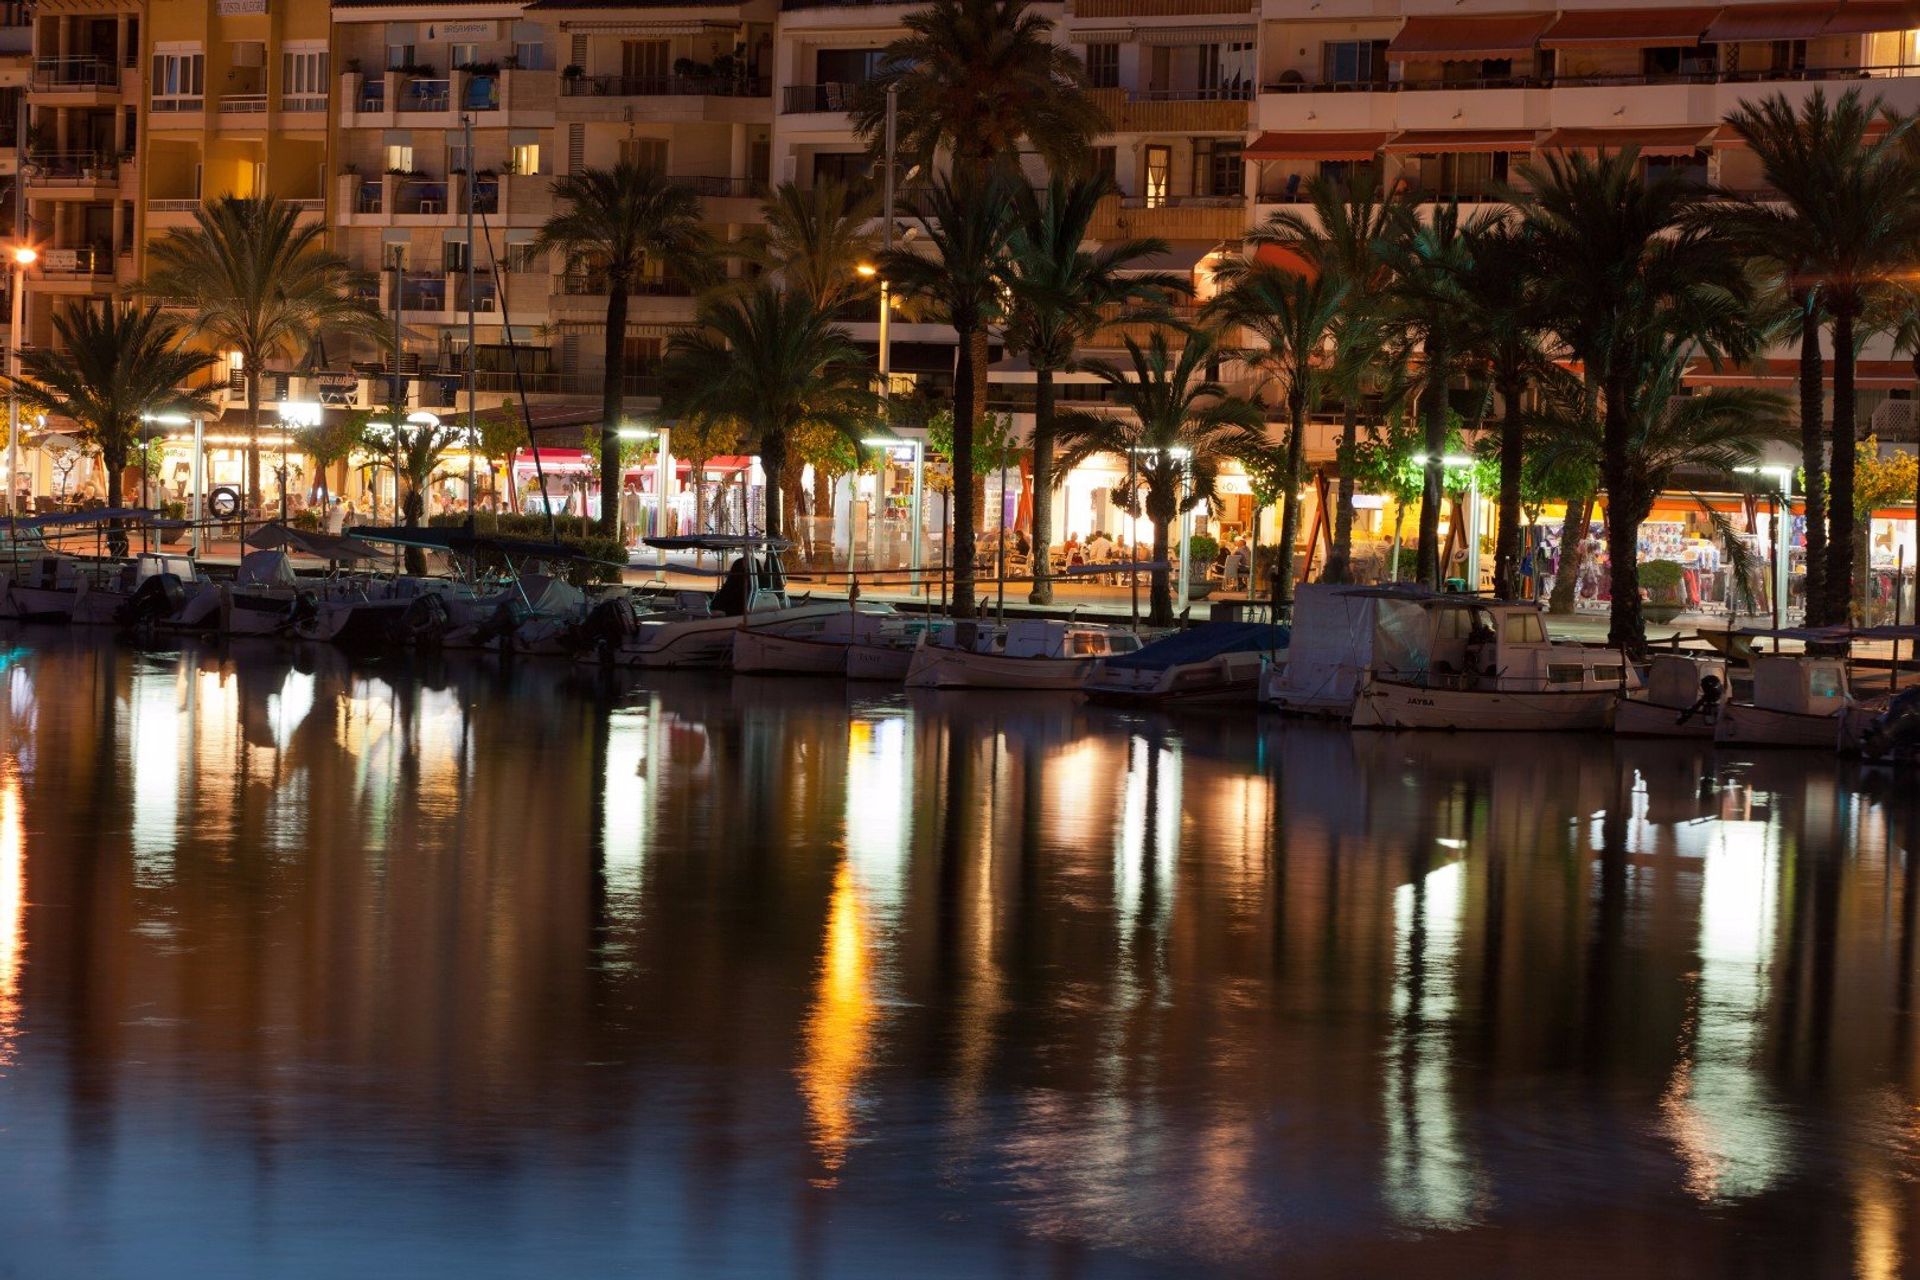 Alcudia's lights at night reflecting on the water